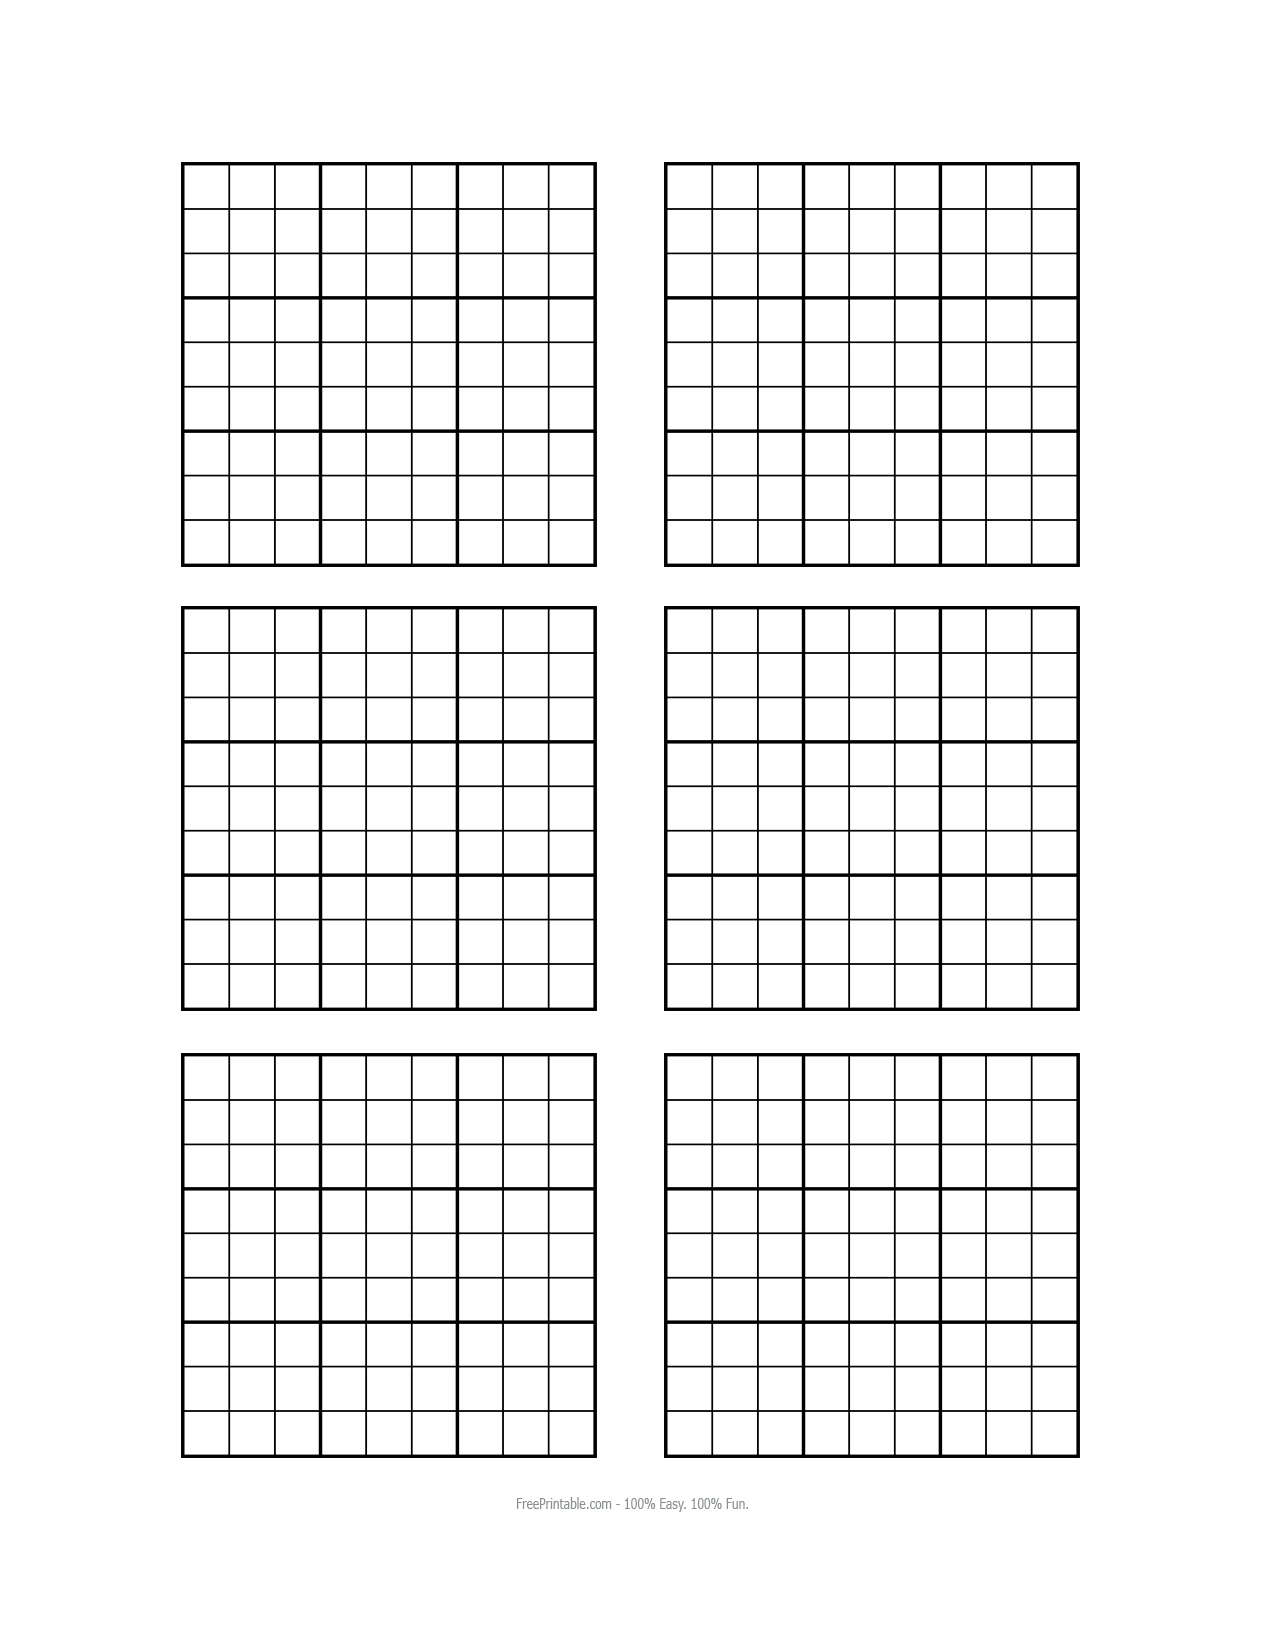 blank-sudoku-grids-to-print-white-gold